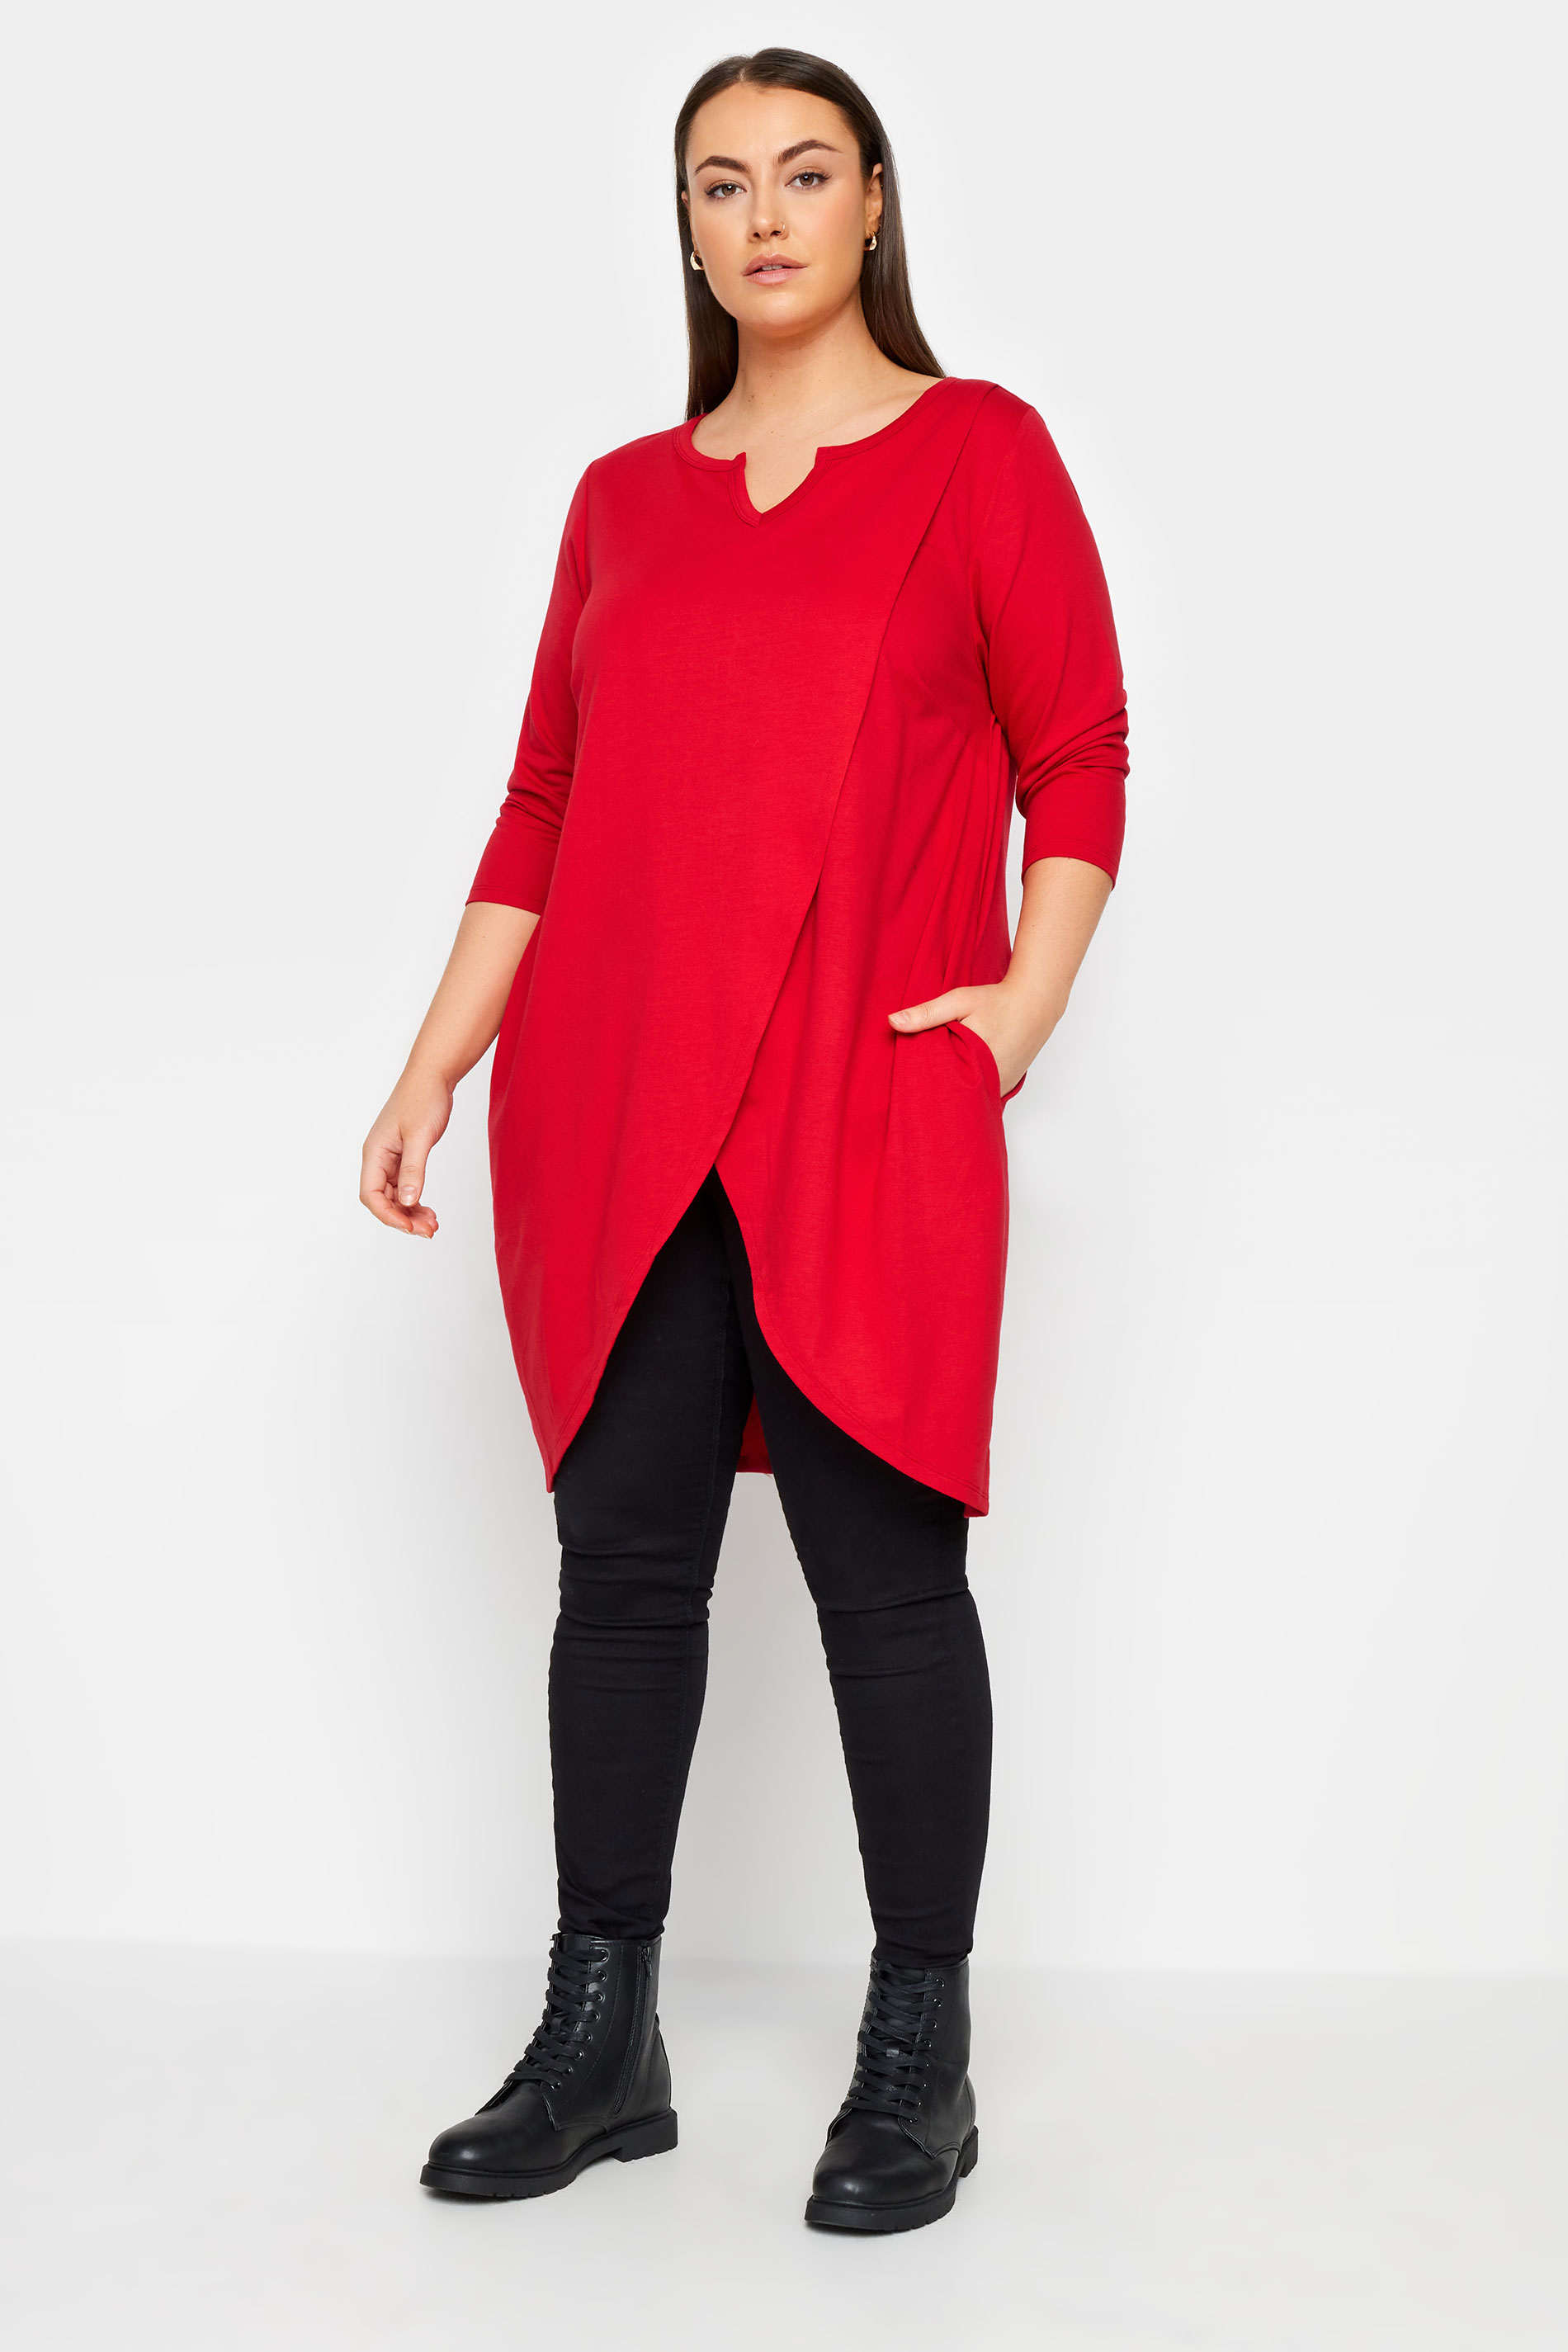 Avenue Red Dipped Hem Tunic Top 1